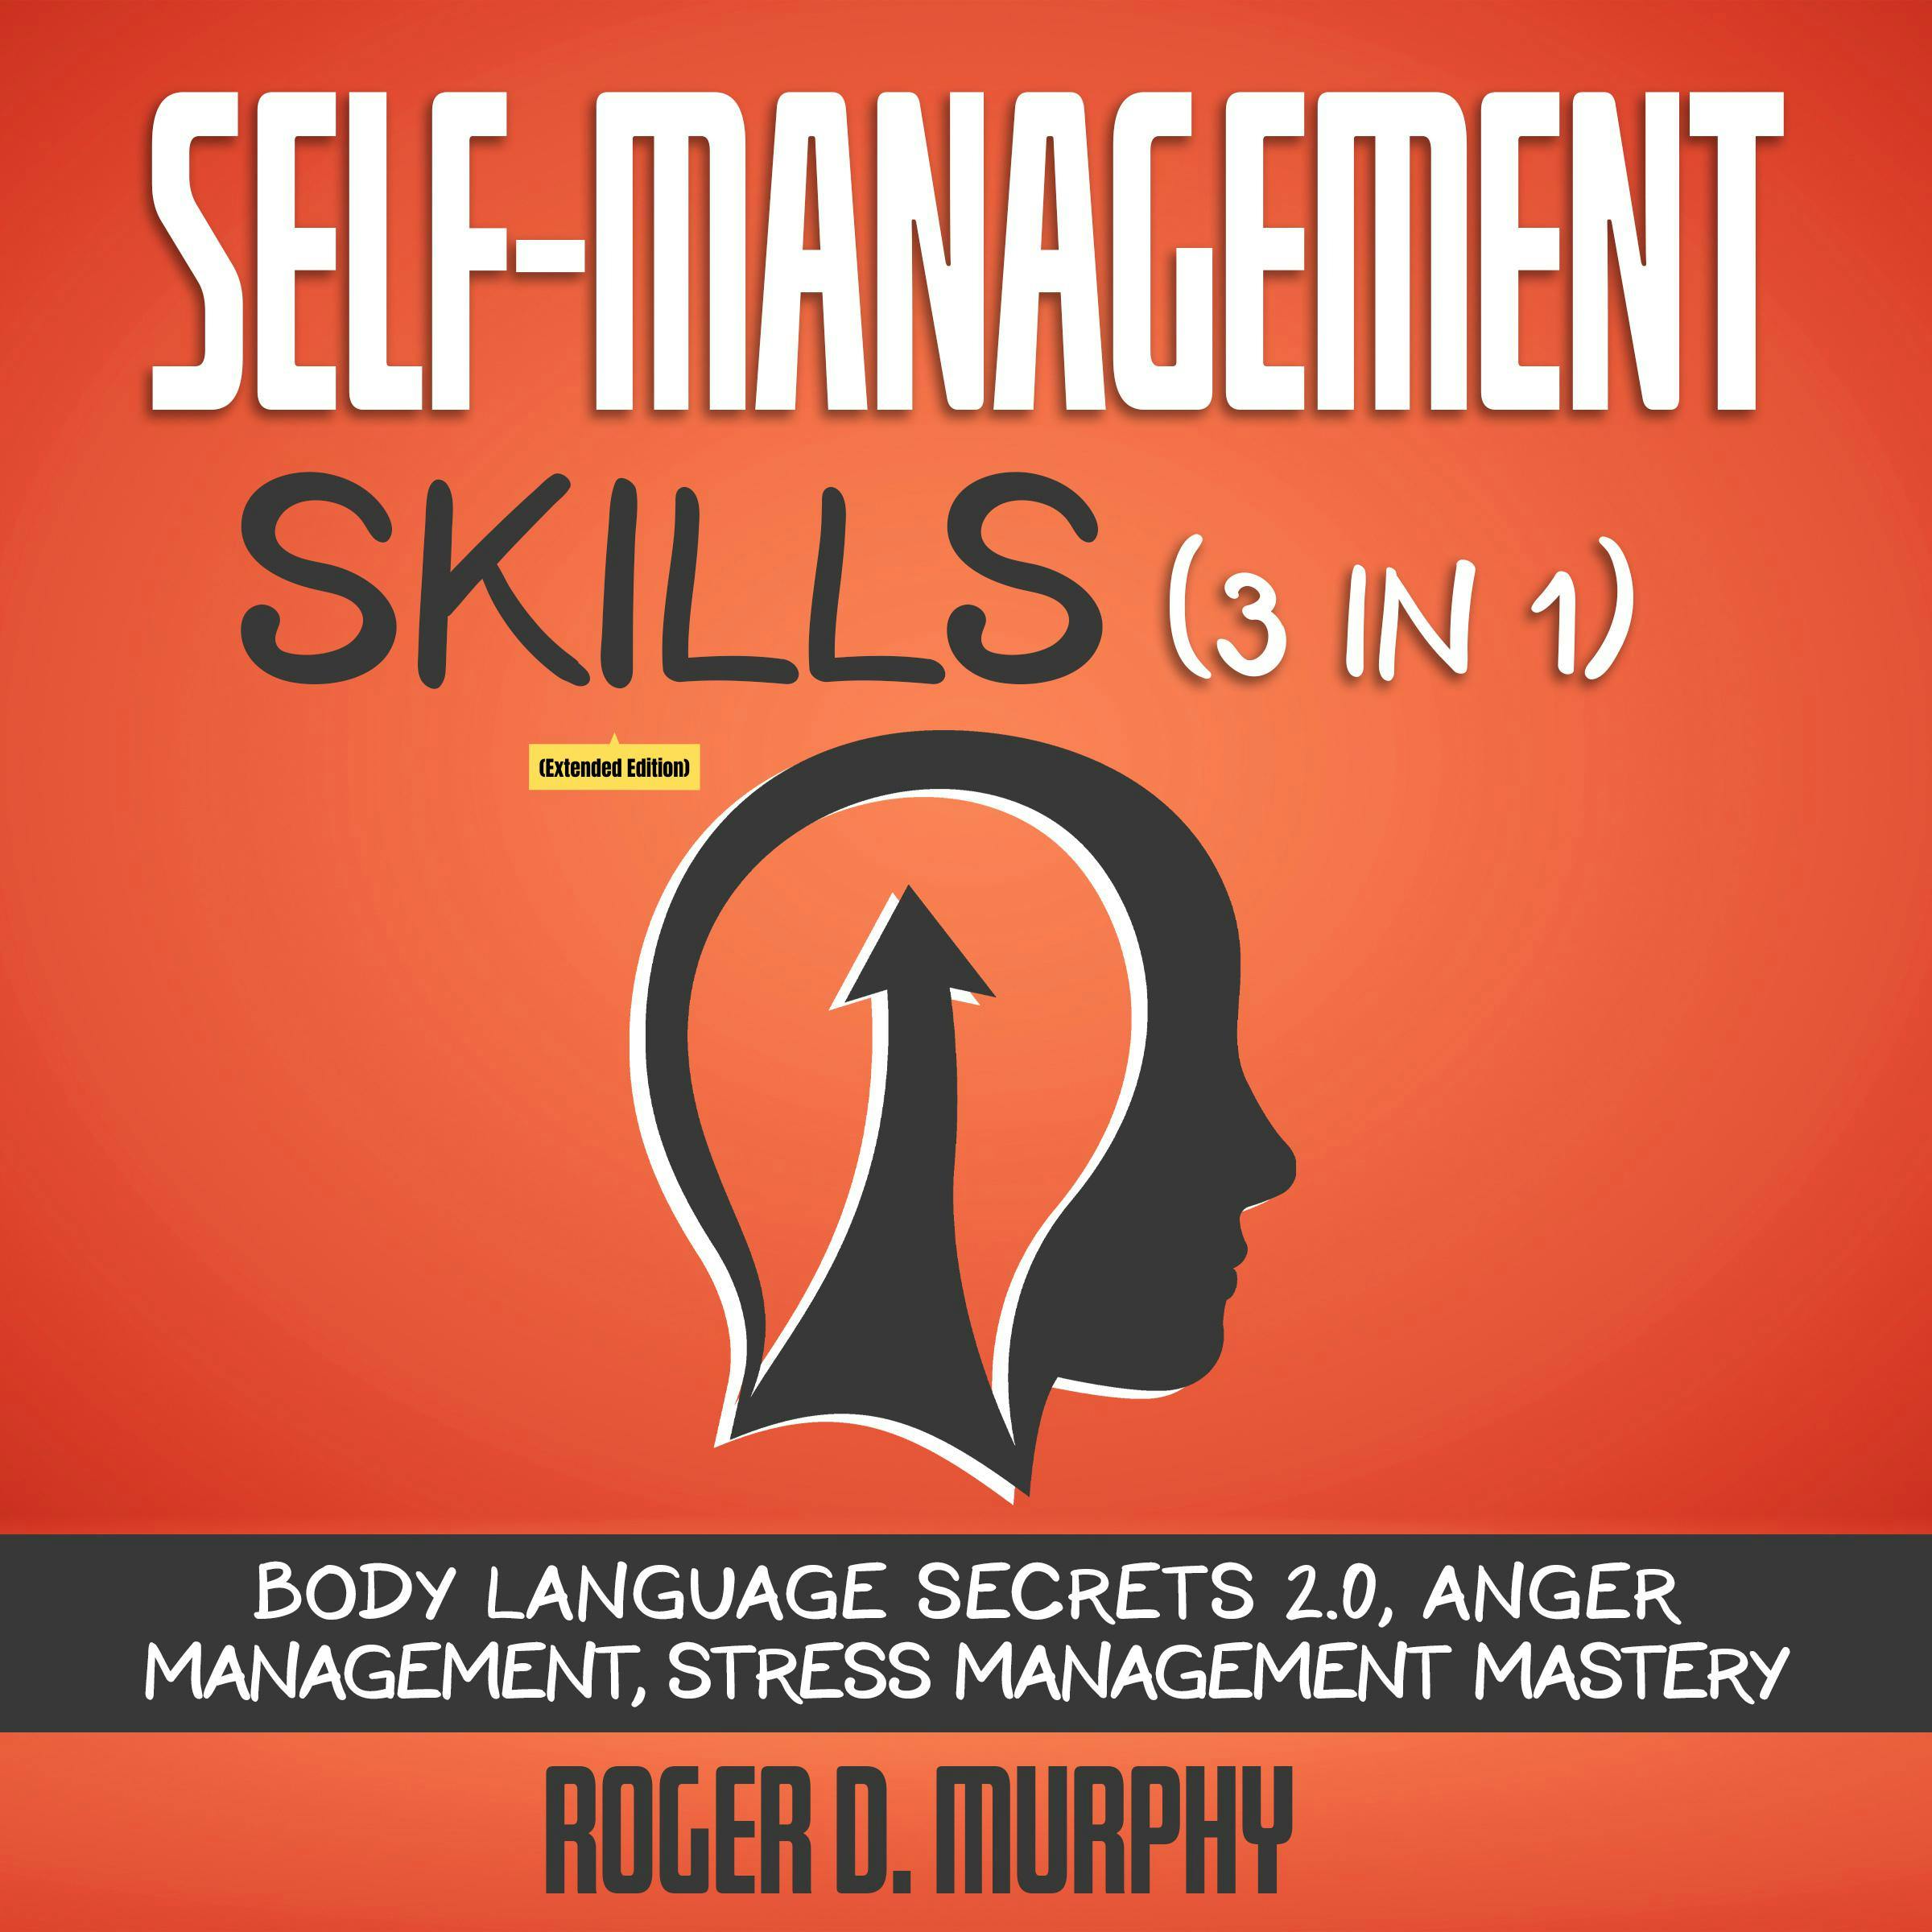 Self-Management Skills (3 in 1) (Extended Edition): Body Language Secrets 2.0, Anger Management, Stress Management Mastery - undefined